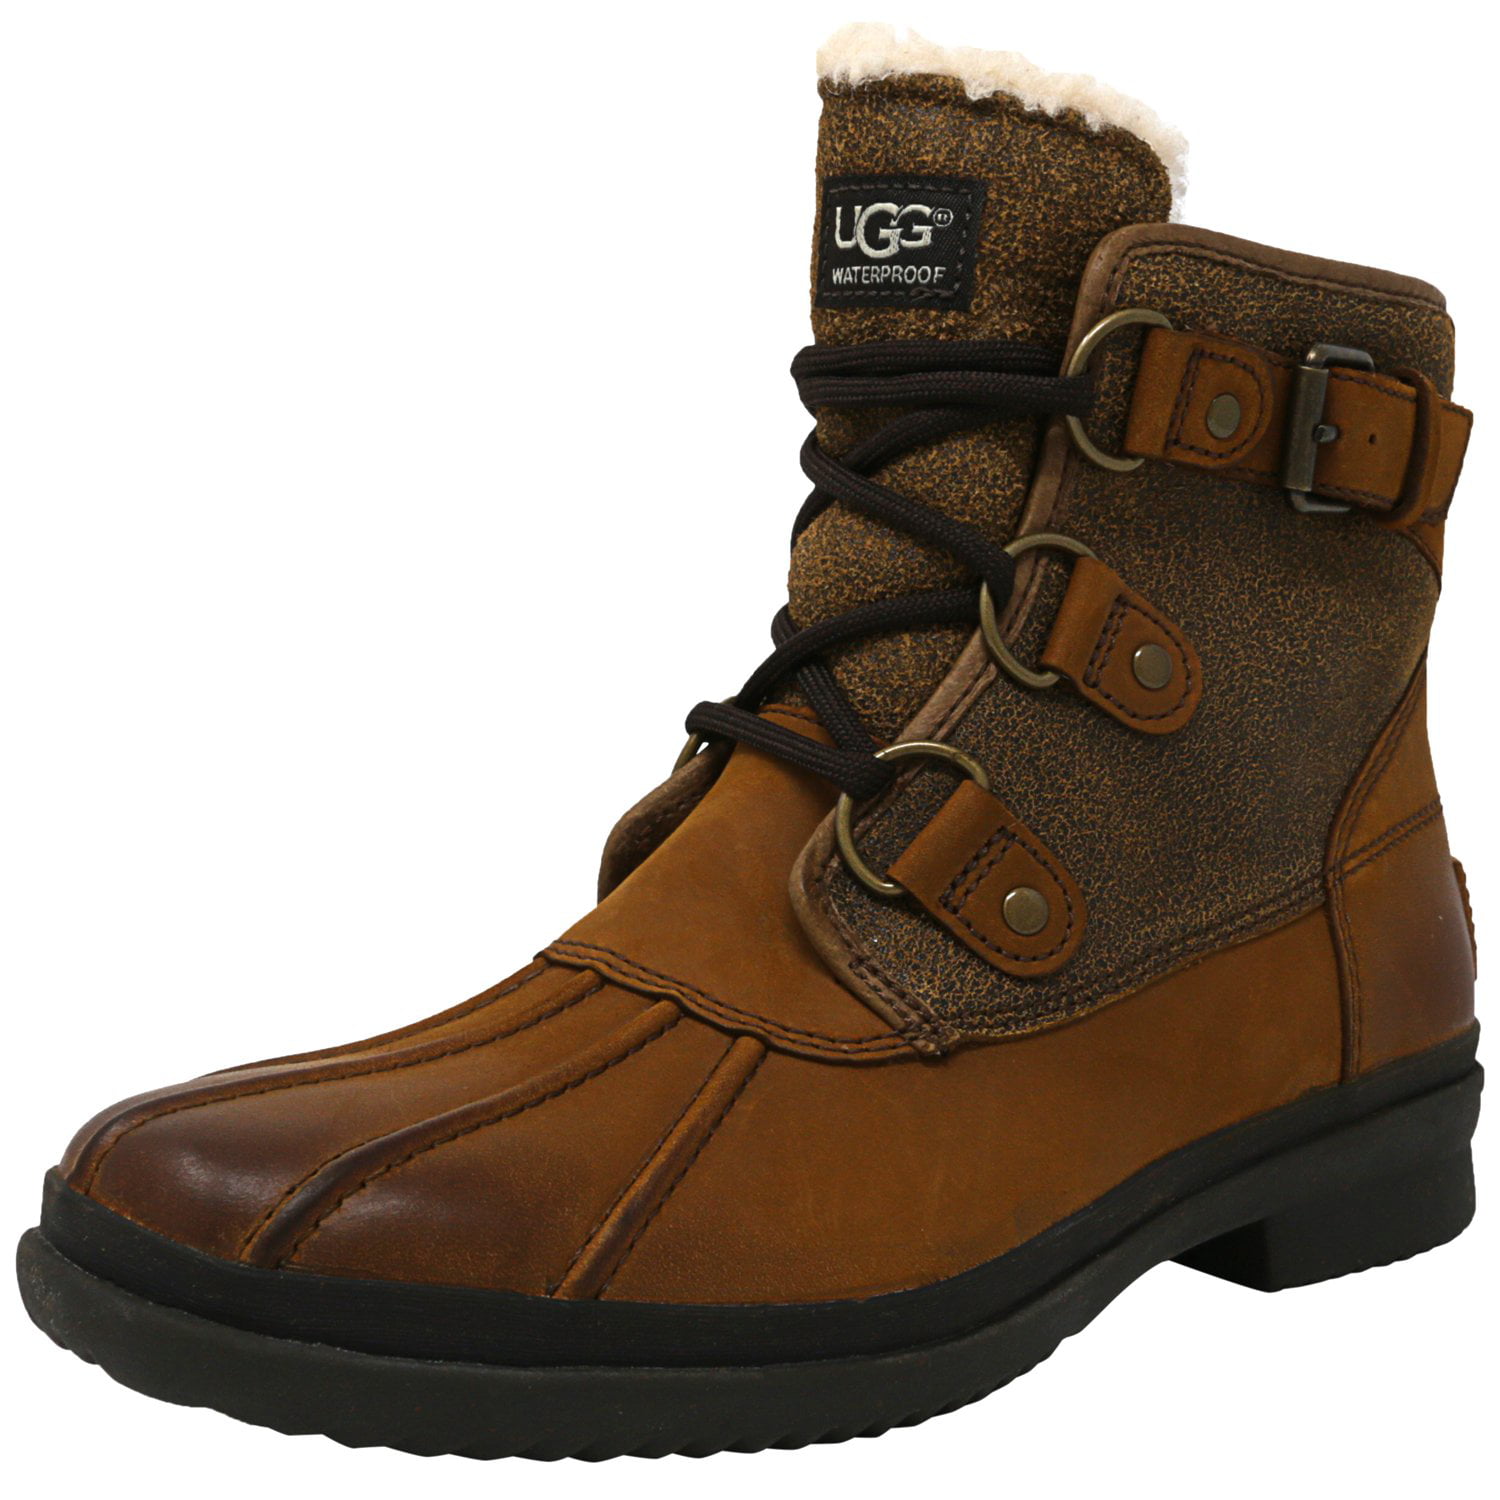 Ugg Women's Cecile Chestnut High-Top Leather Boot - 9M - Walmart.com